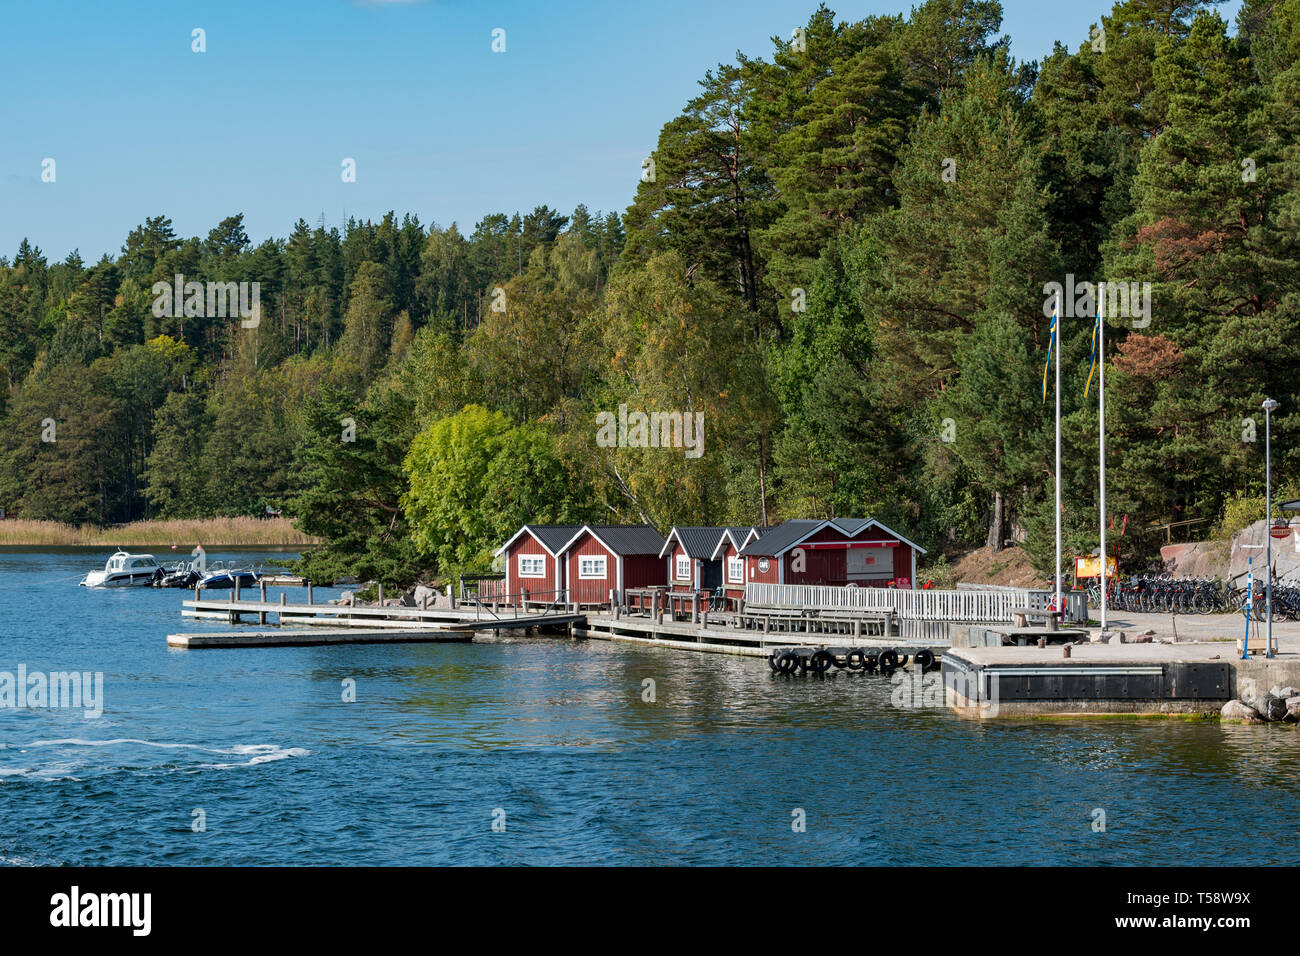 Tiny wooden fishermen's huts are popular with tourists and locals alike as accommodation while exploring the Stockholm archipelago during the summer Stock Photo